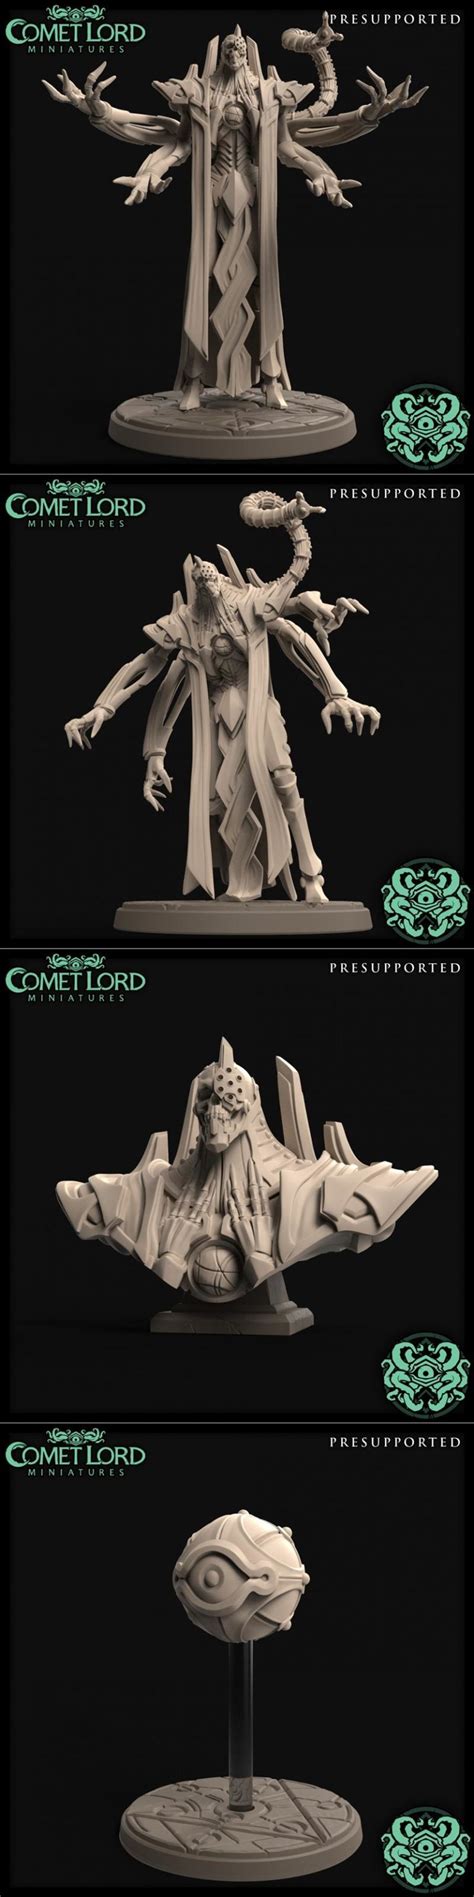 Desire Fx 3d Models Comet Lord Miniatures The Mad Architect 3d